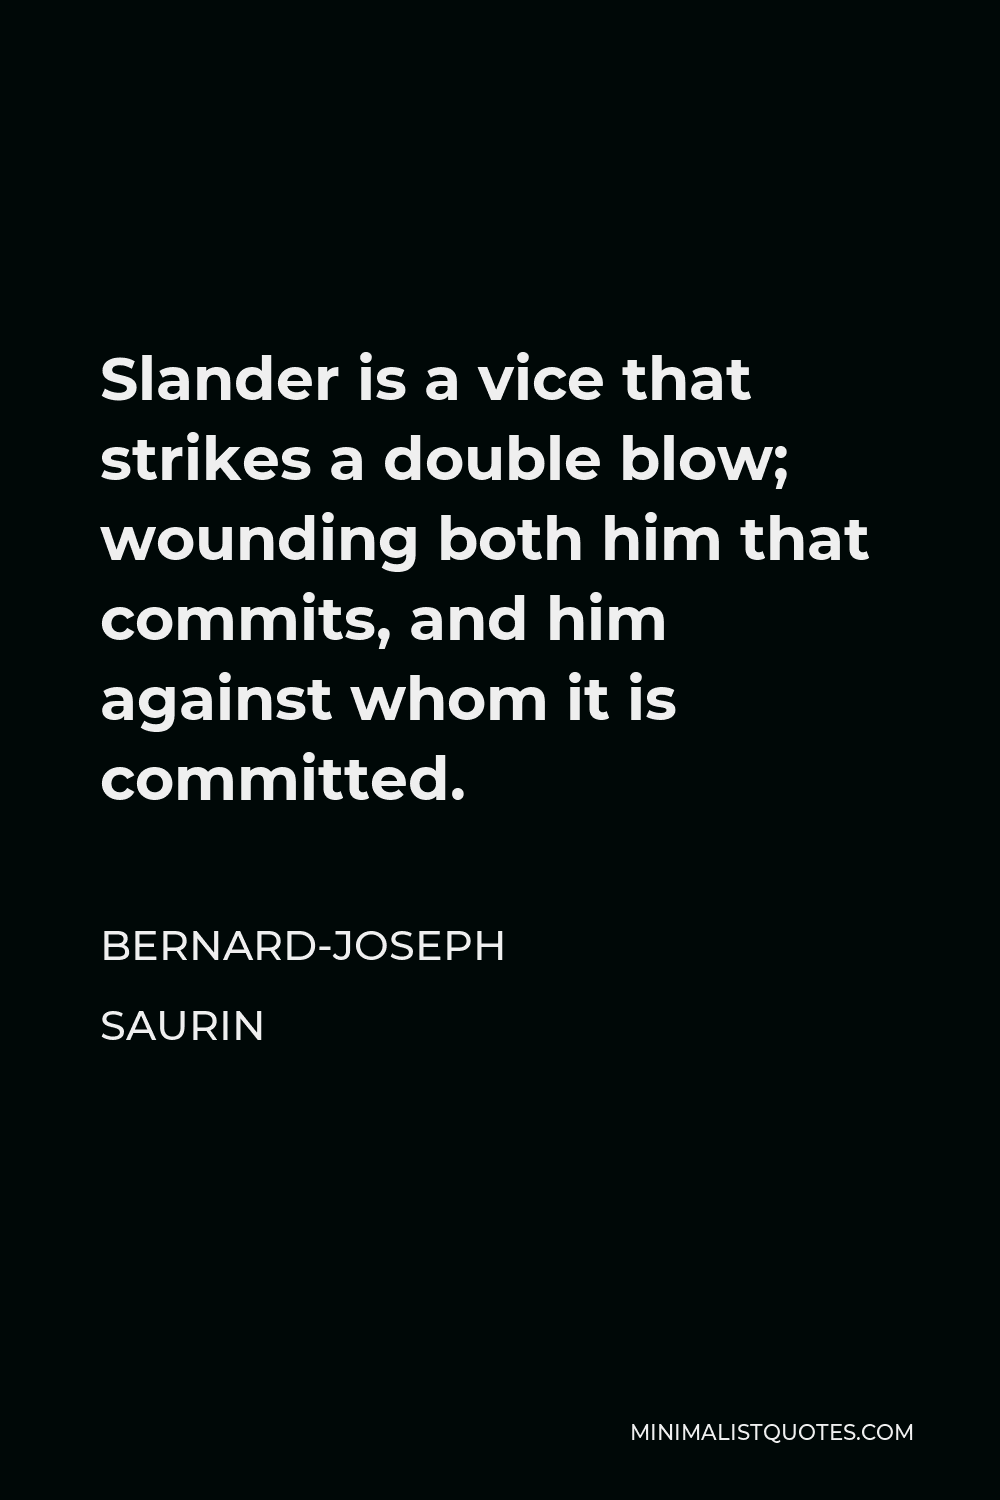 Bernard-Joseph Saurin Quote - Slander is a vice that strikes a double blow; wounding both him that commits, and him against whom it is committed.